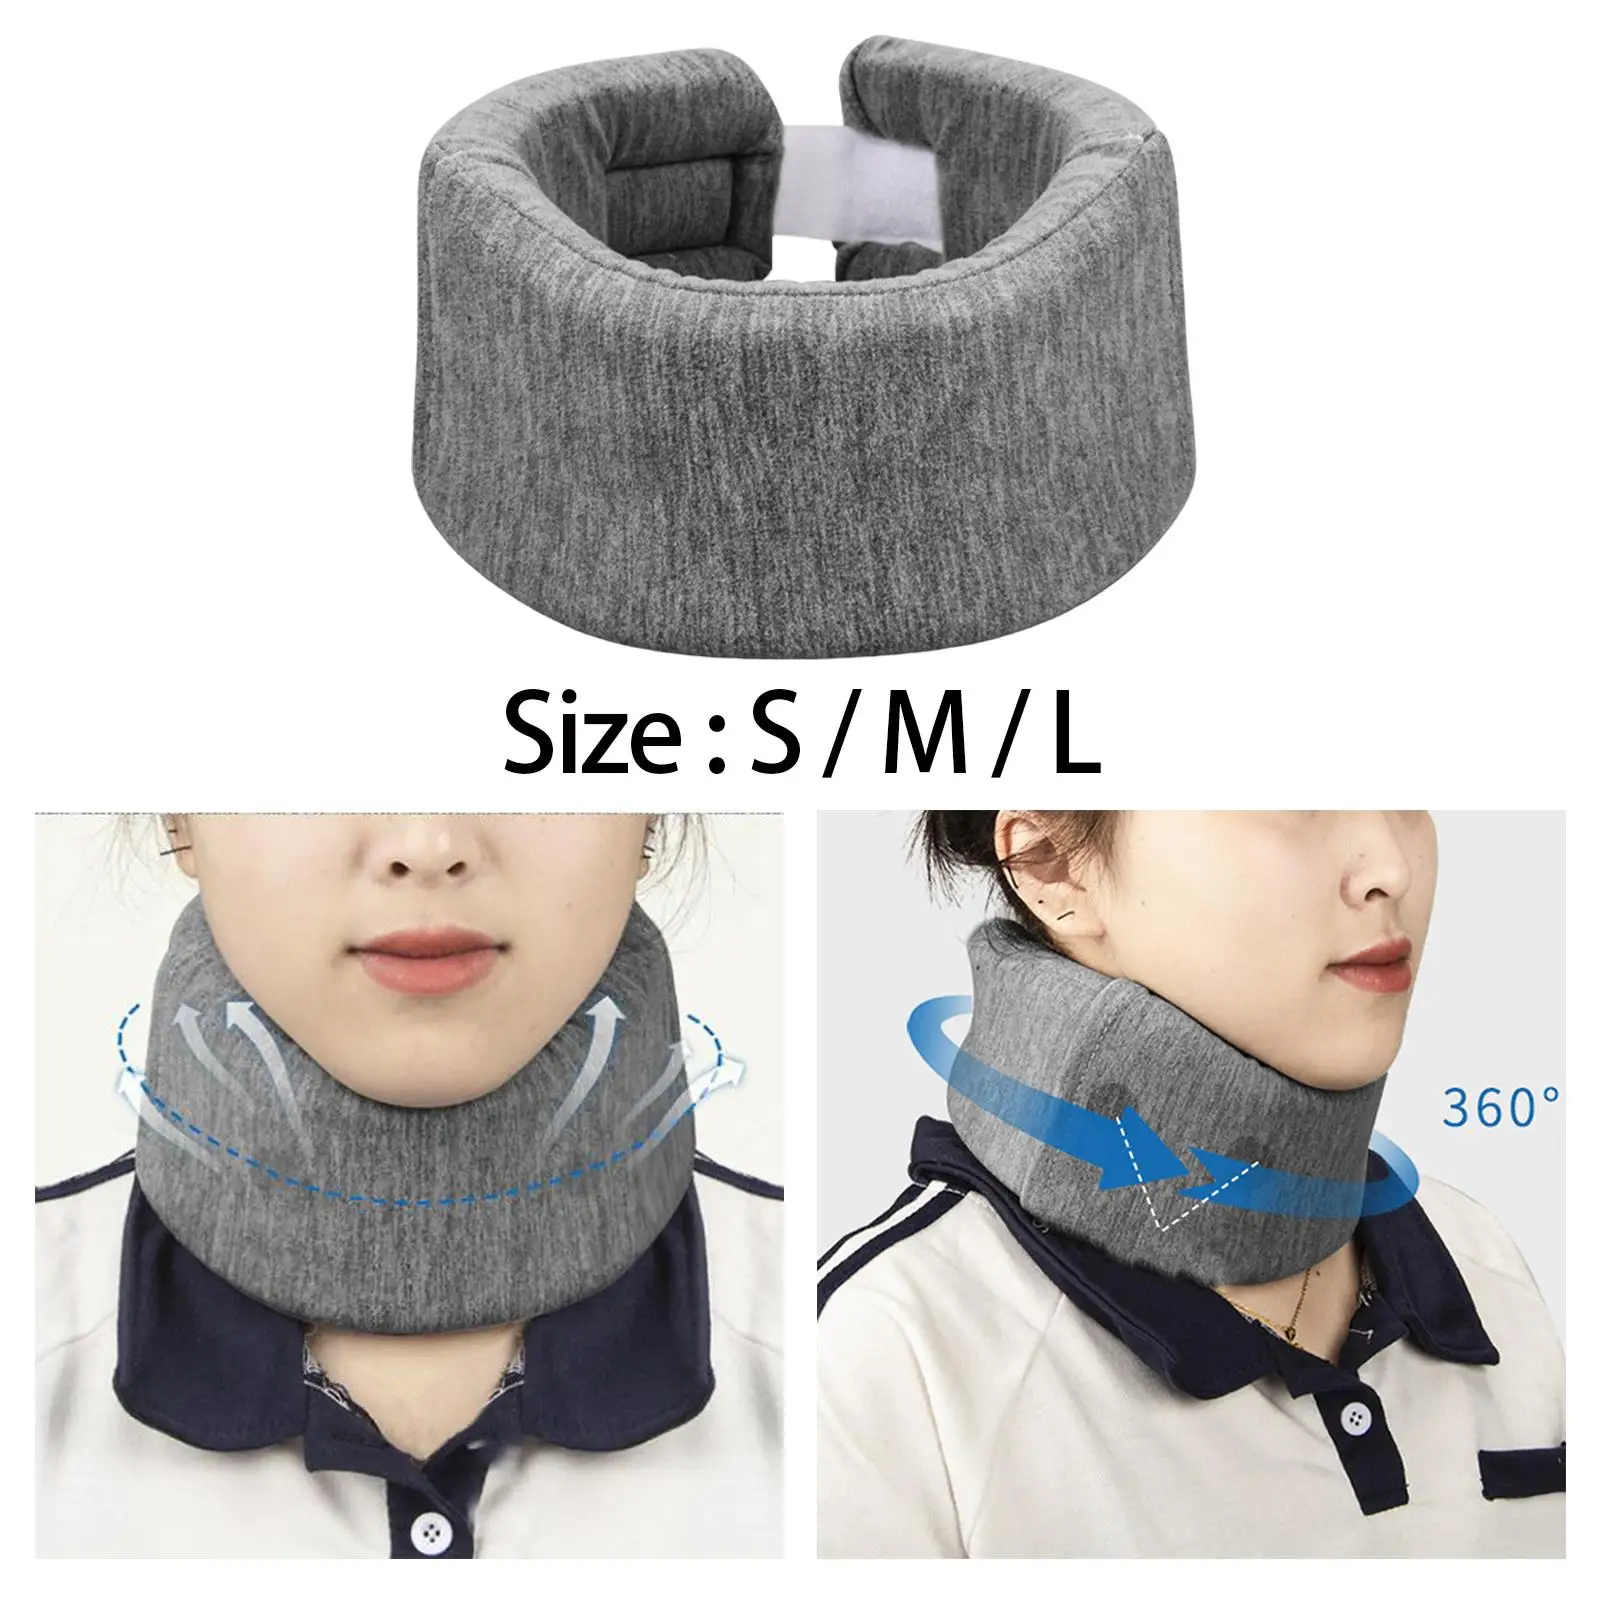 Traveling Pillow Machine Washable Portable Soft Neck Pillow for Traveling on Airplane Support Pillow for Car Plane Home Rest Use